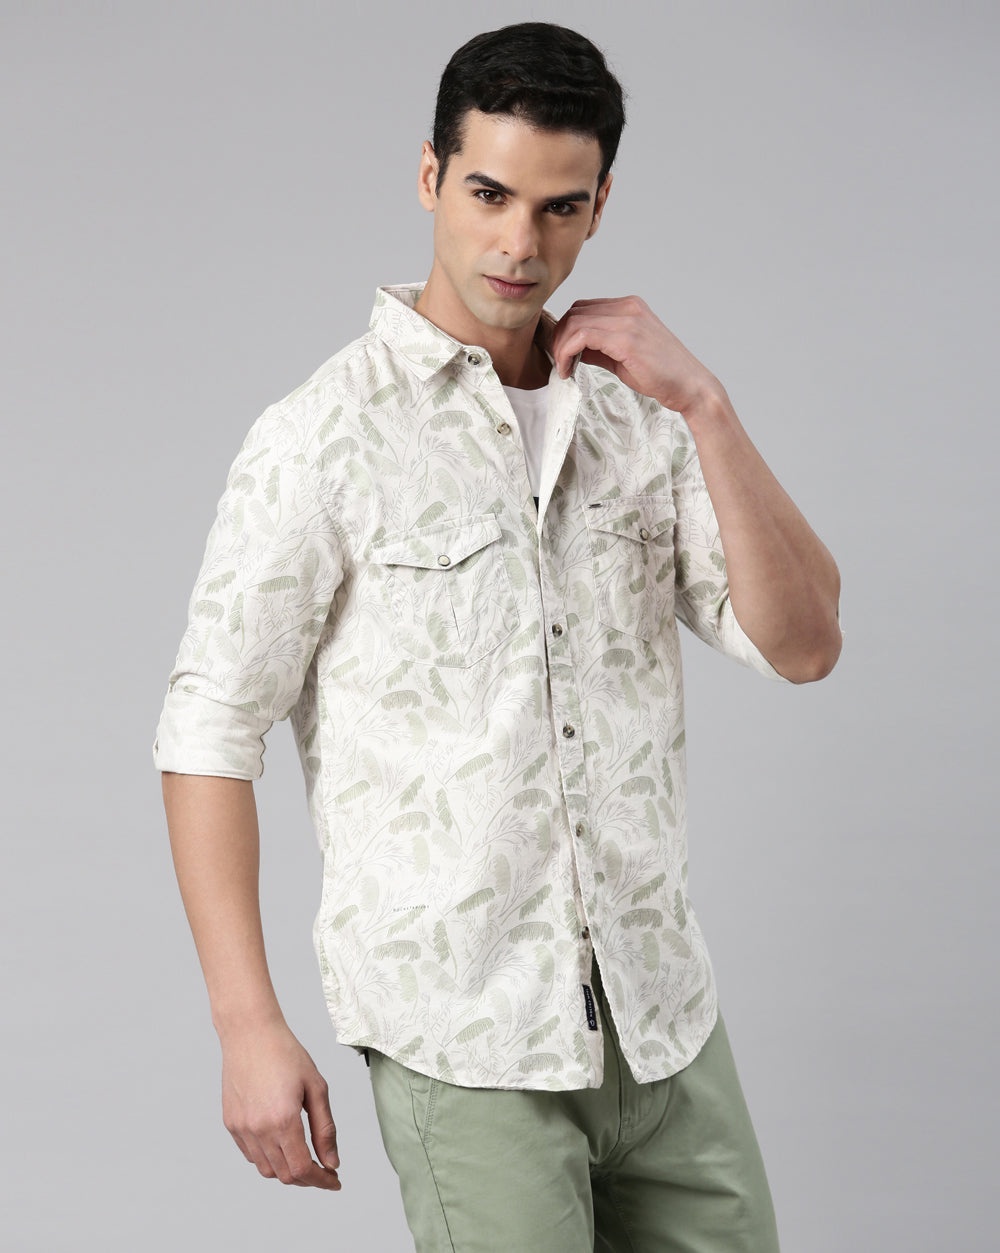 Making a Statement: The Allure of Printed Shirts for Men